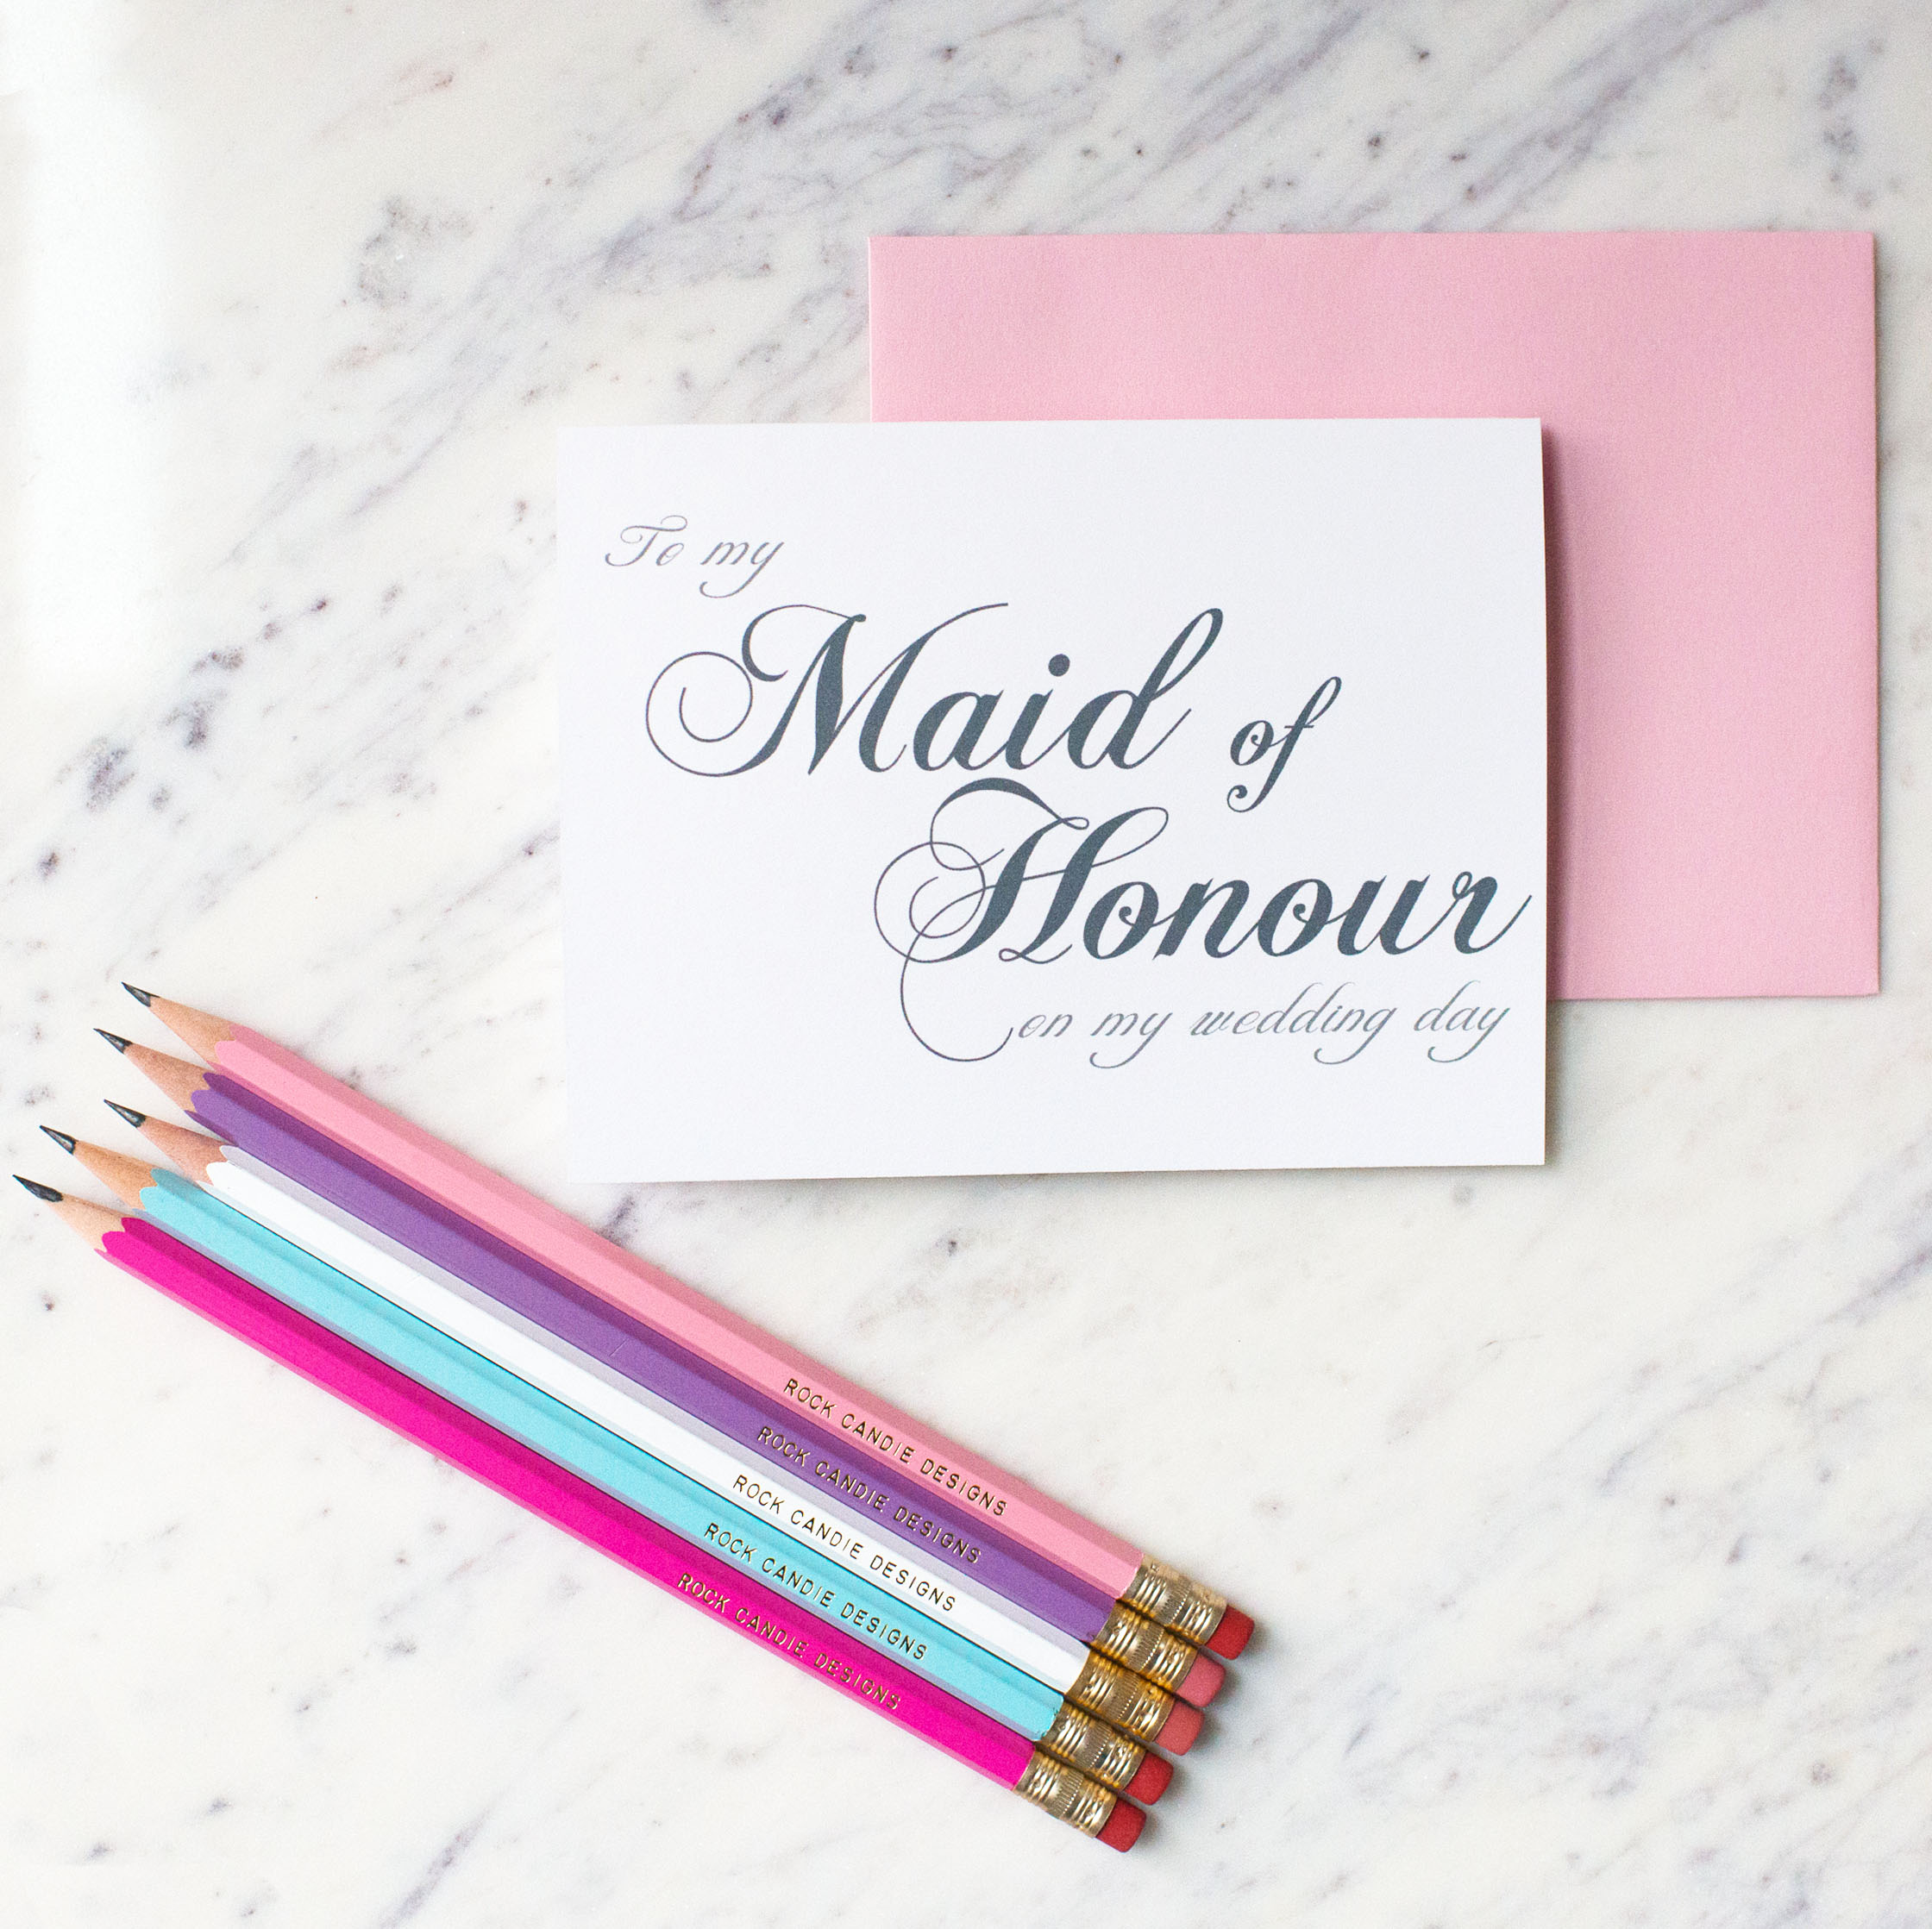 To My Maid of Honour On My Wedding Day Card